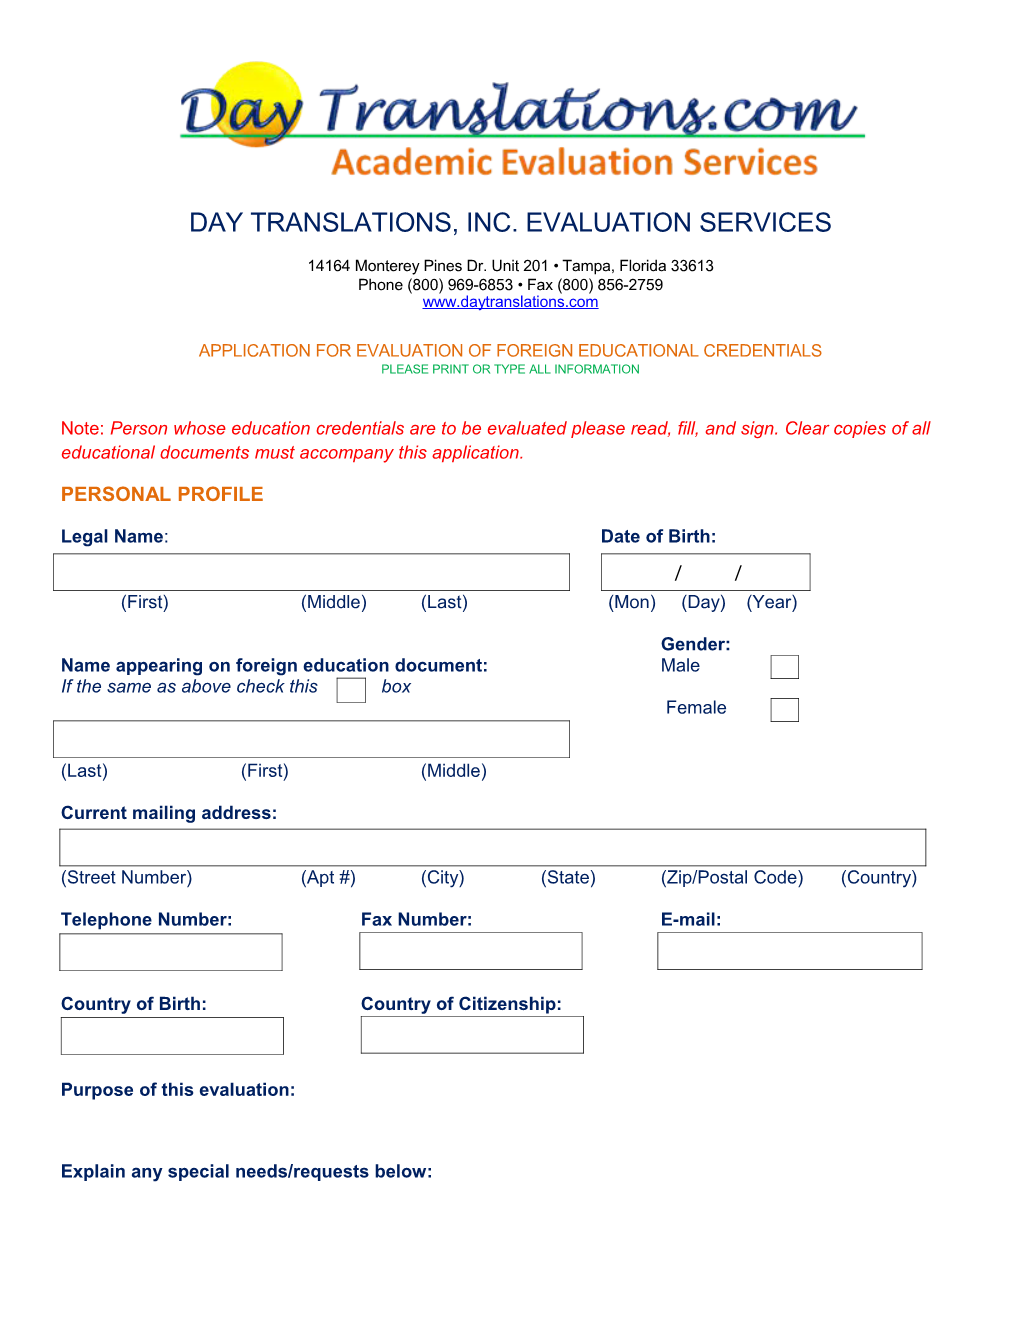 Day Translations, Inc. Evaluation Services